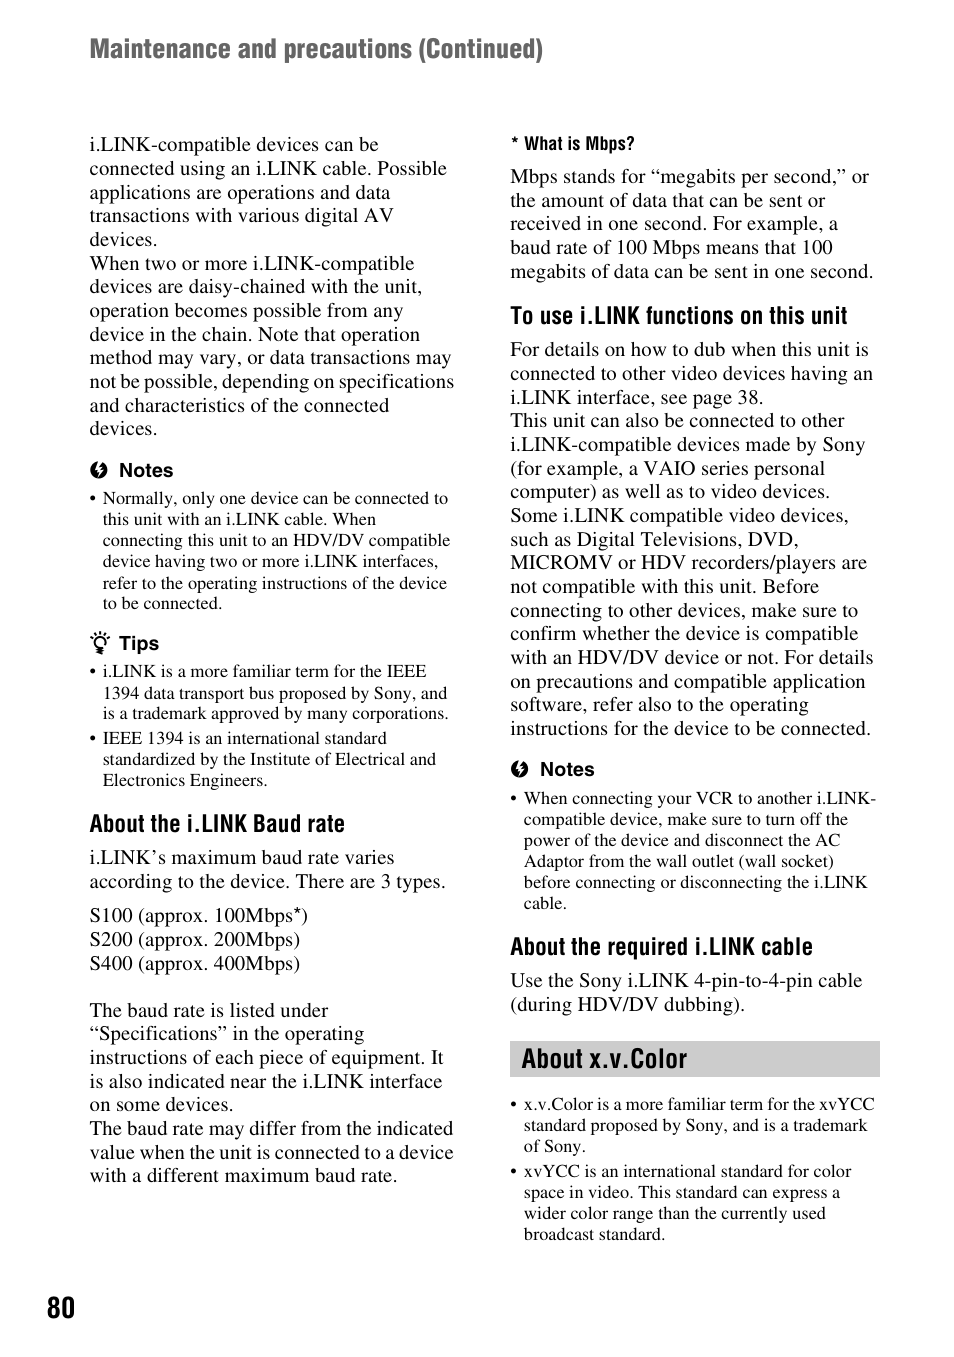 About x.v.color, P. 80) | Sony GV-HD700 User Manual | Page 80 / 108